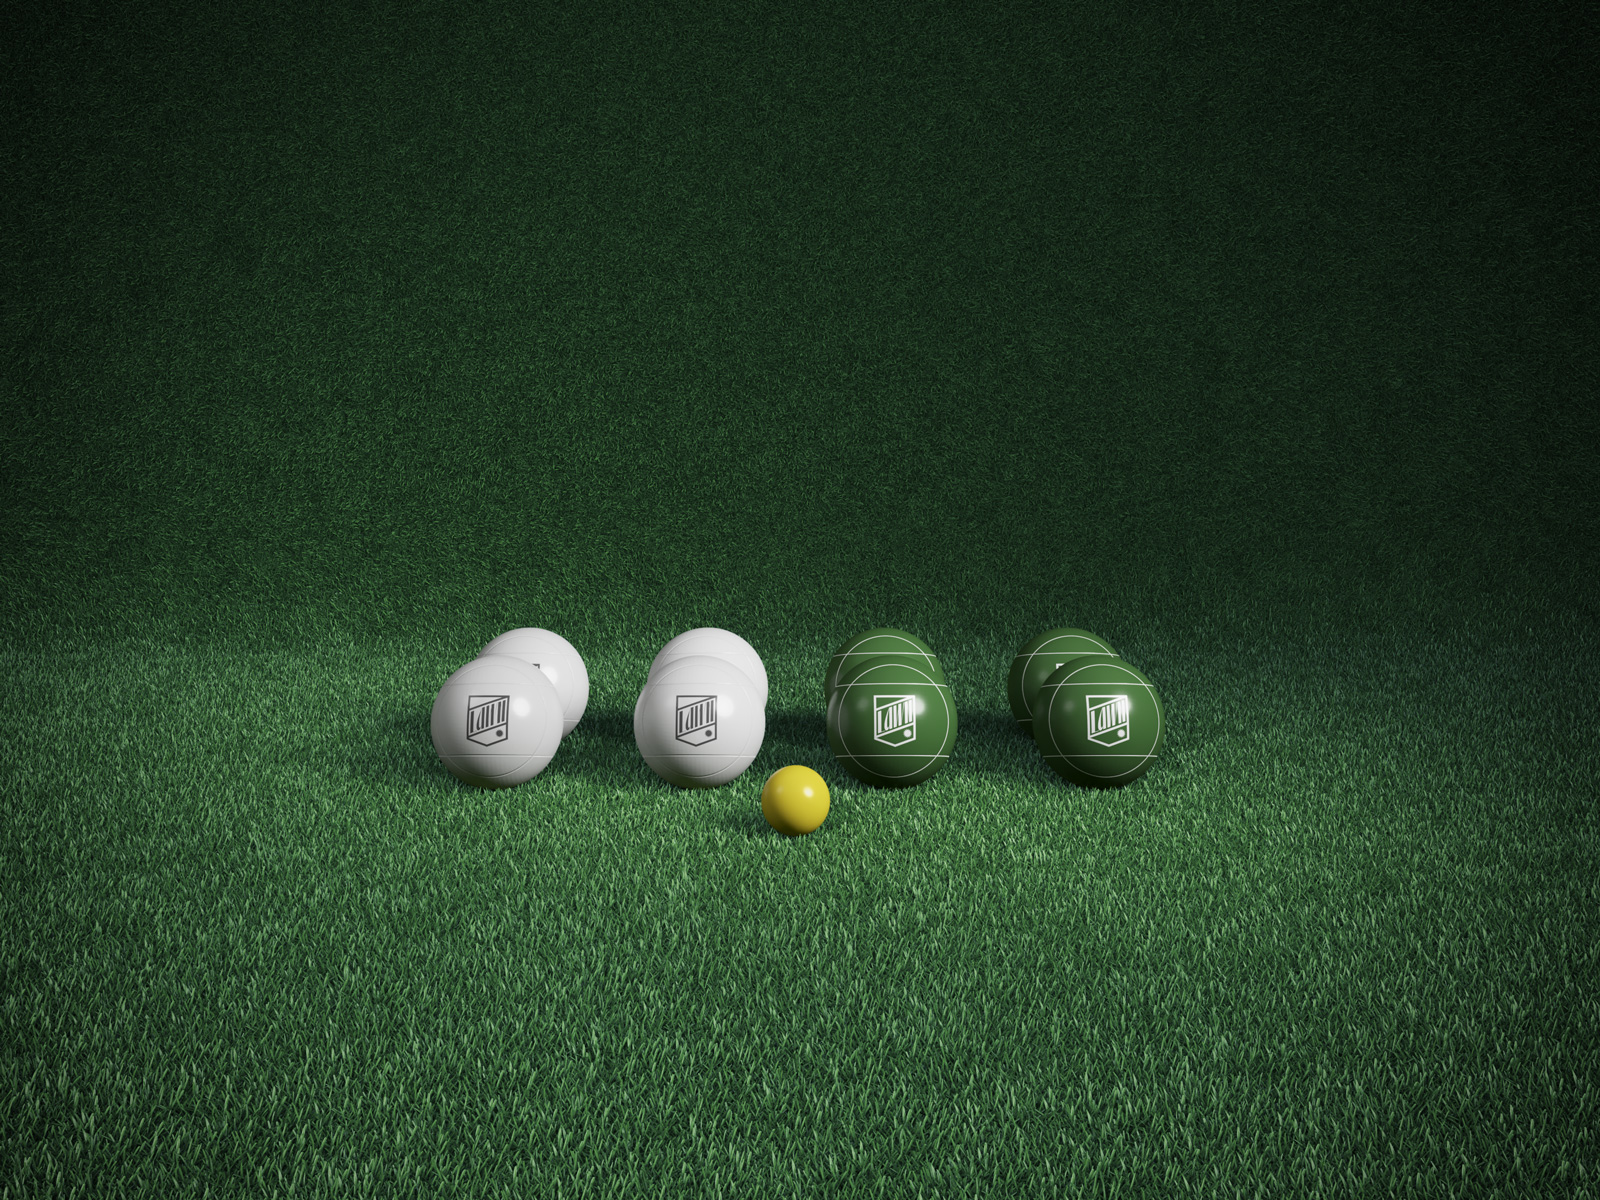 A set of gaming of equipment for the game bocce, with white and green balls, set against a green turf background.